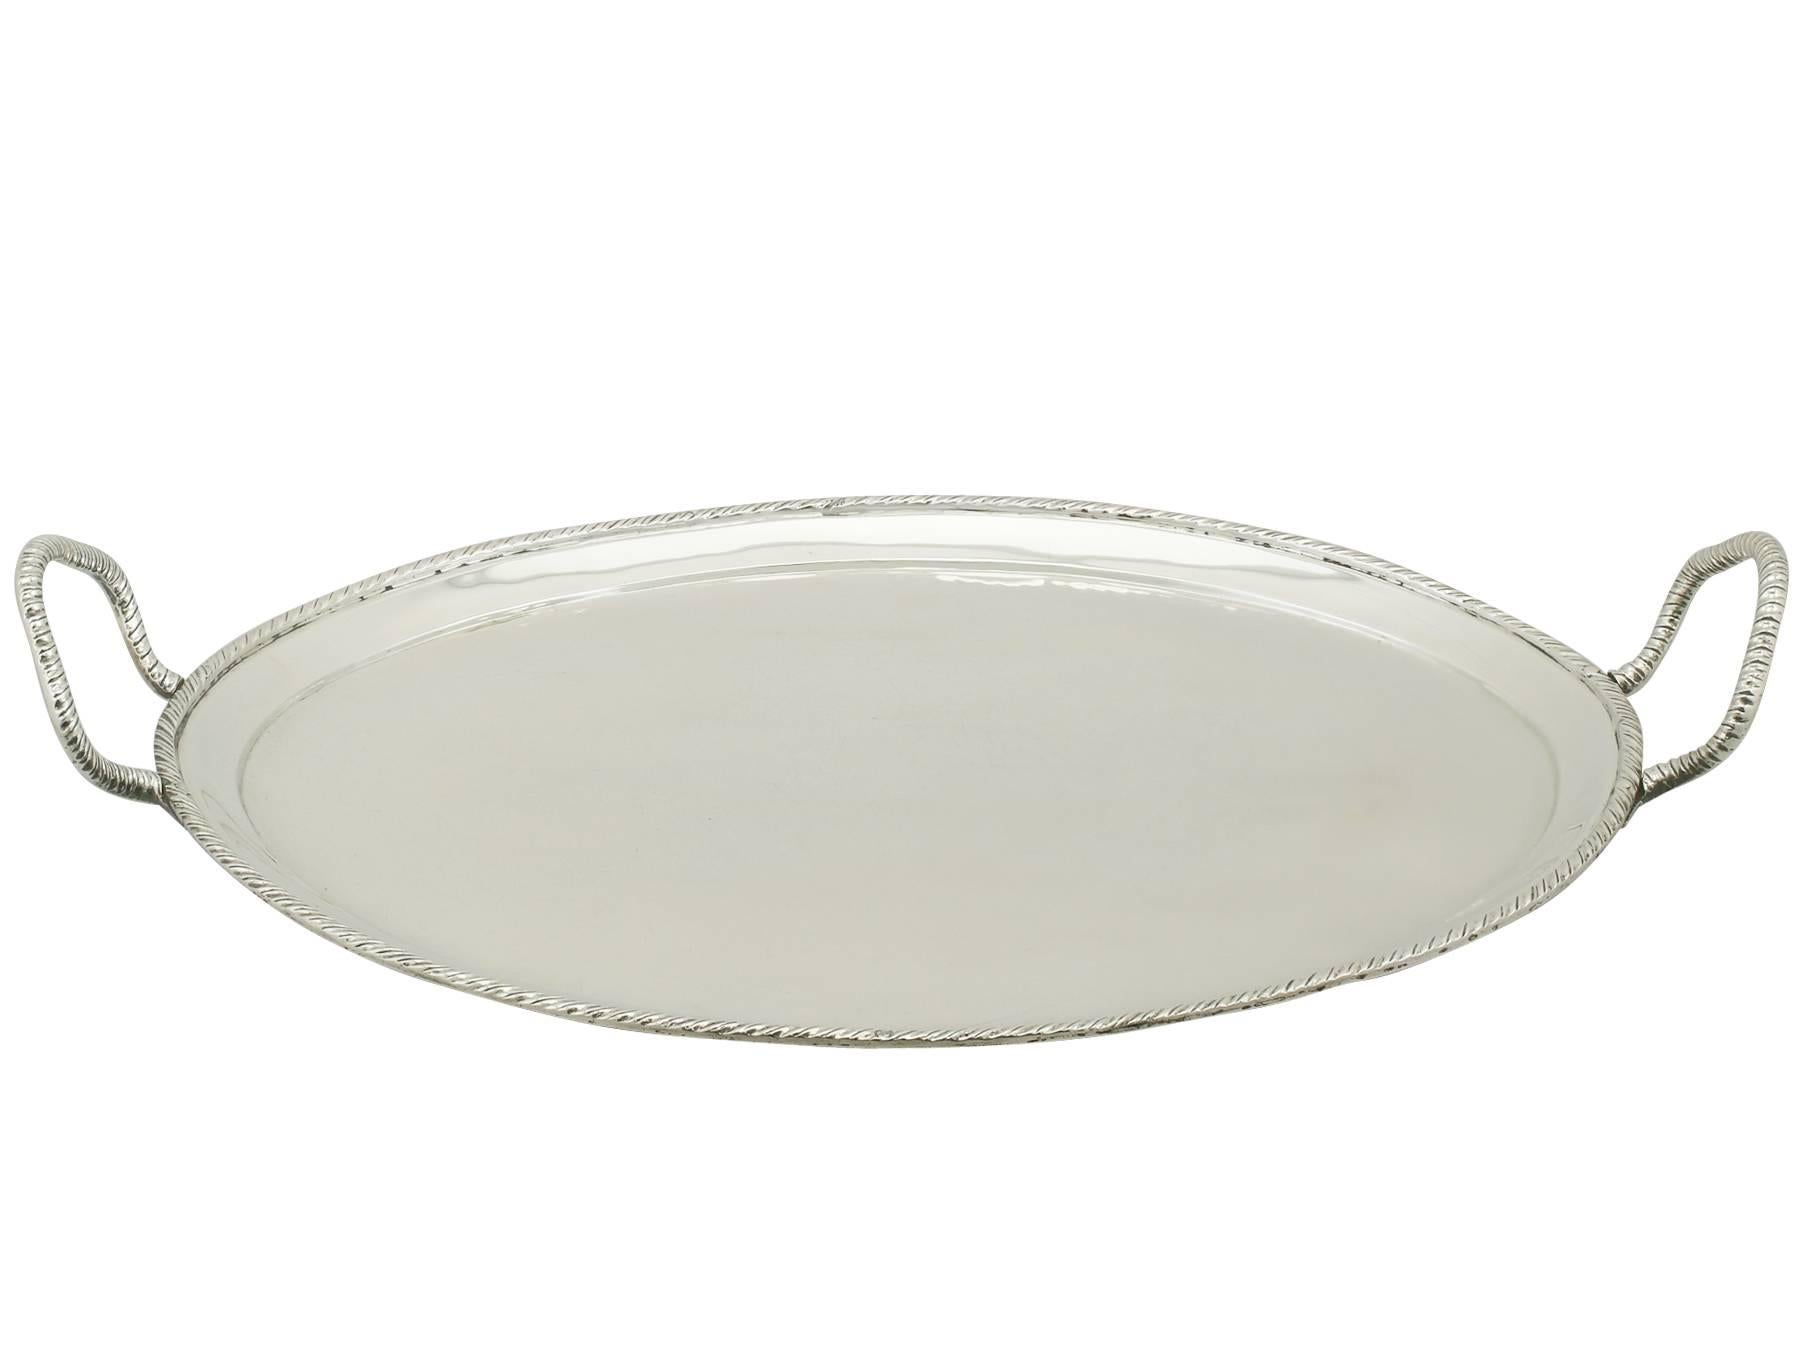 A fine and impressive antique Italian silver two handled tray; an addition to our continental silver collection.

This impressive antique Italian silver tray has a plain oval form.

The surface of this Italian tray is plain and